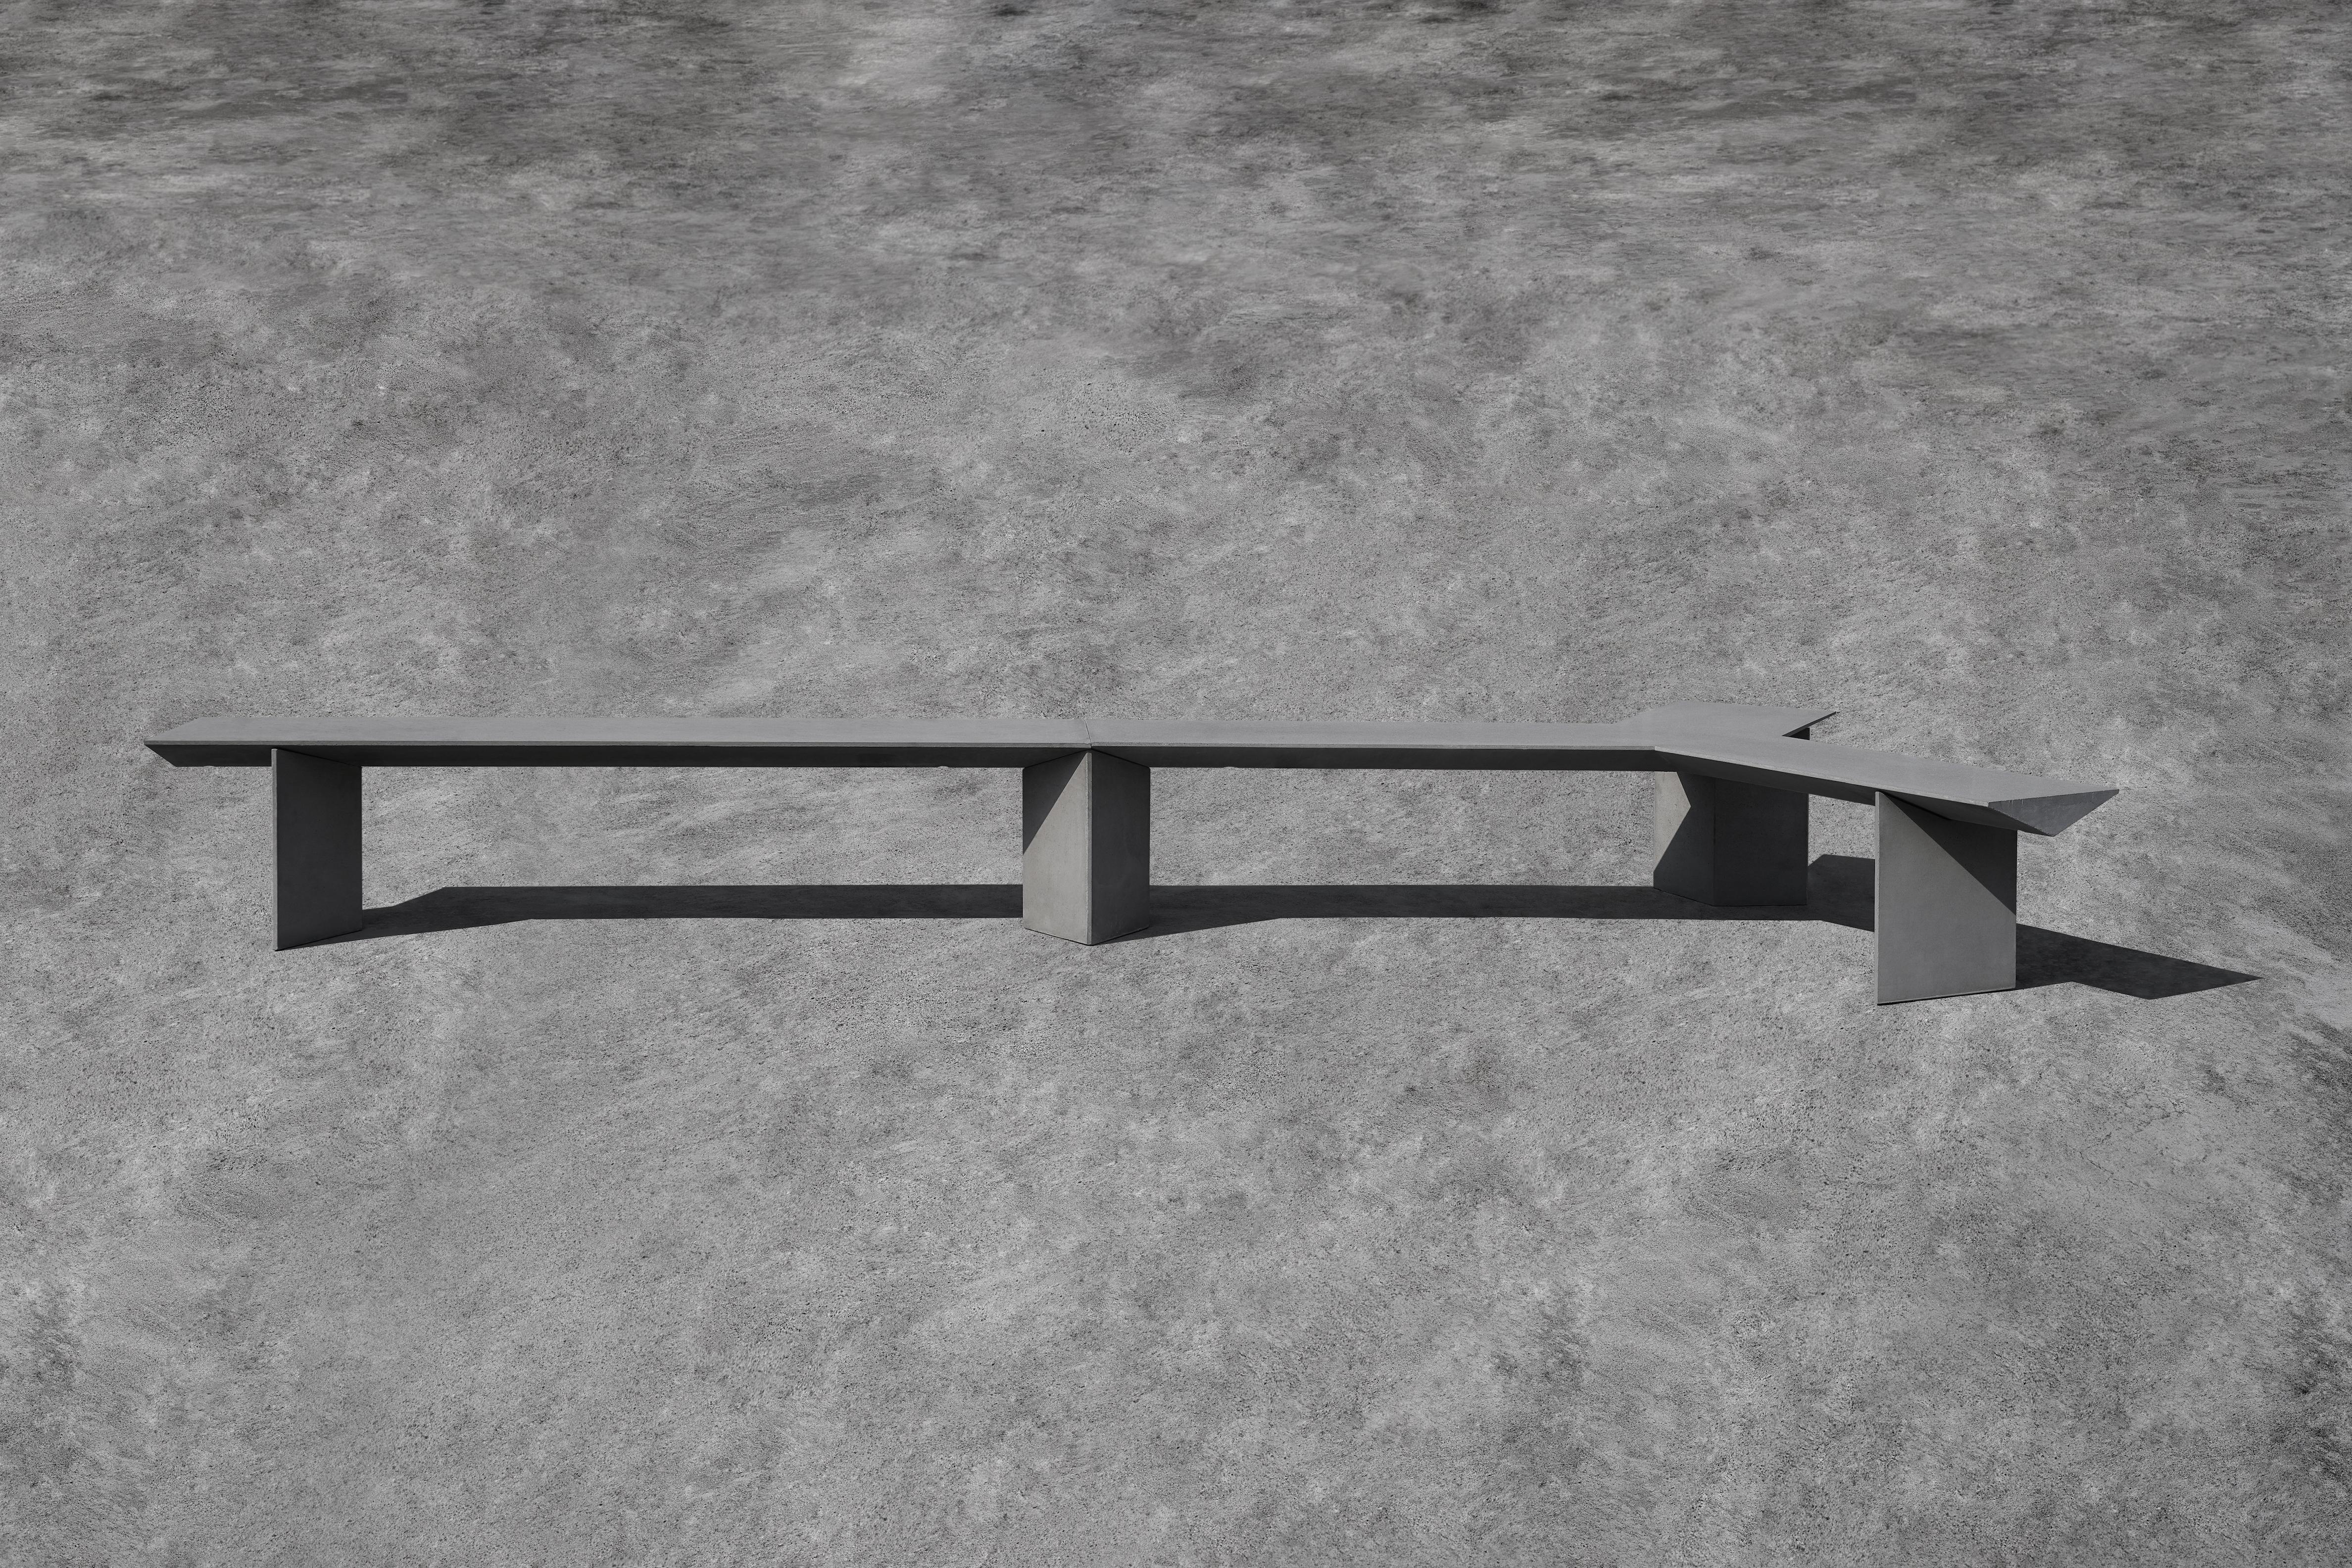 LIANG: Modular Benches by Bentu Design

Concrete
Measures: 2045×1700×445 mm 
206 kg
Outdoor use: OK

Assemble several modules (LIANG 1 and LIANG 2) to create a sculptural bench.

--
Bentu Desing is a Guangzhou-based experimental design